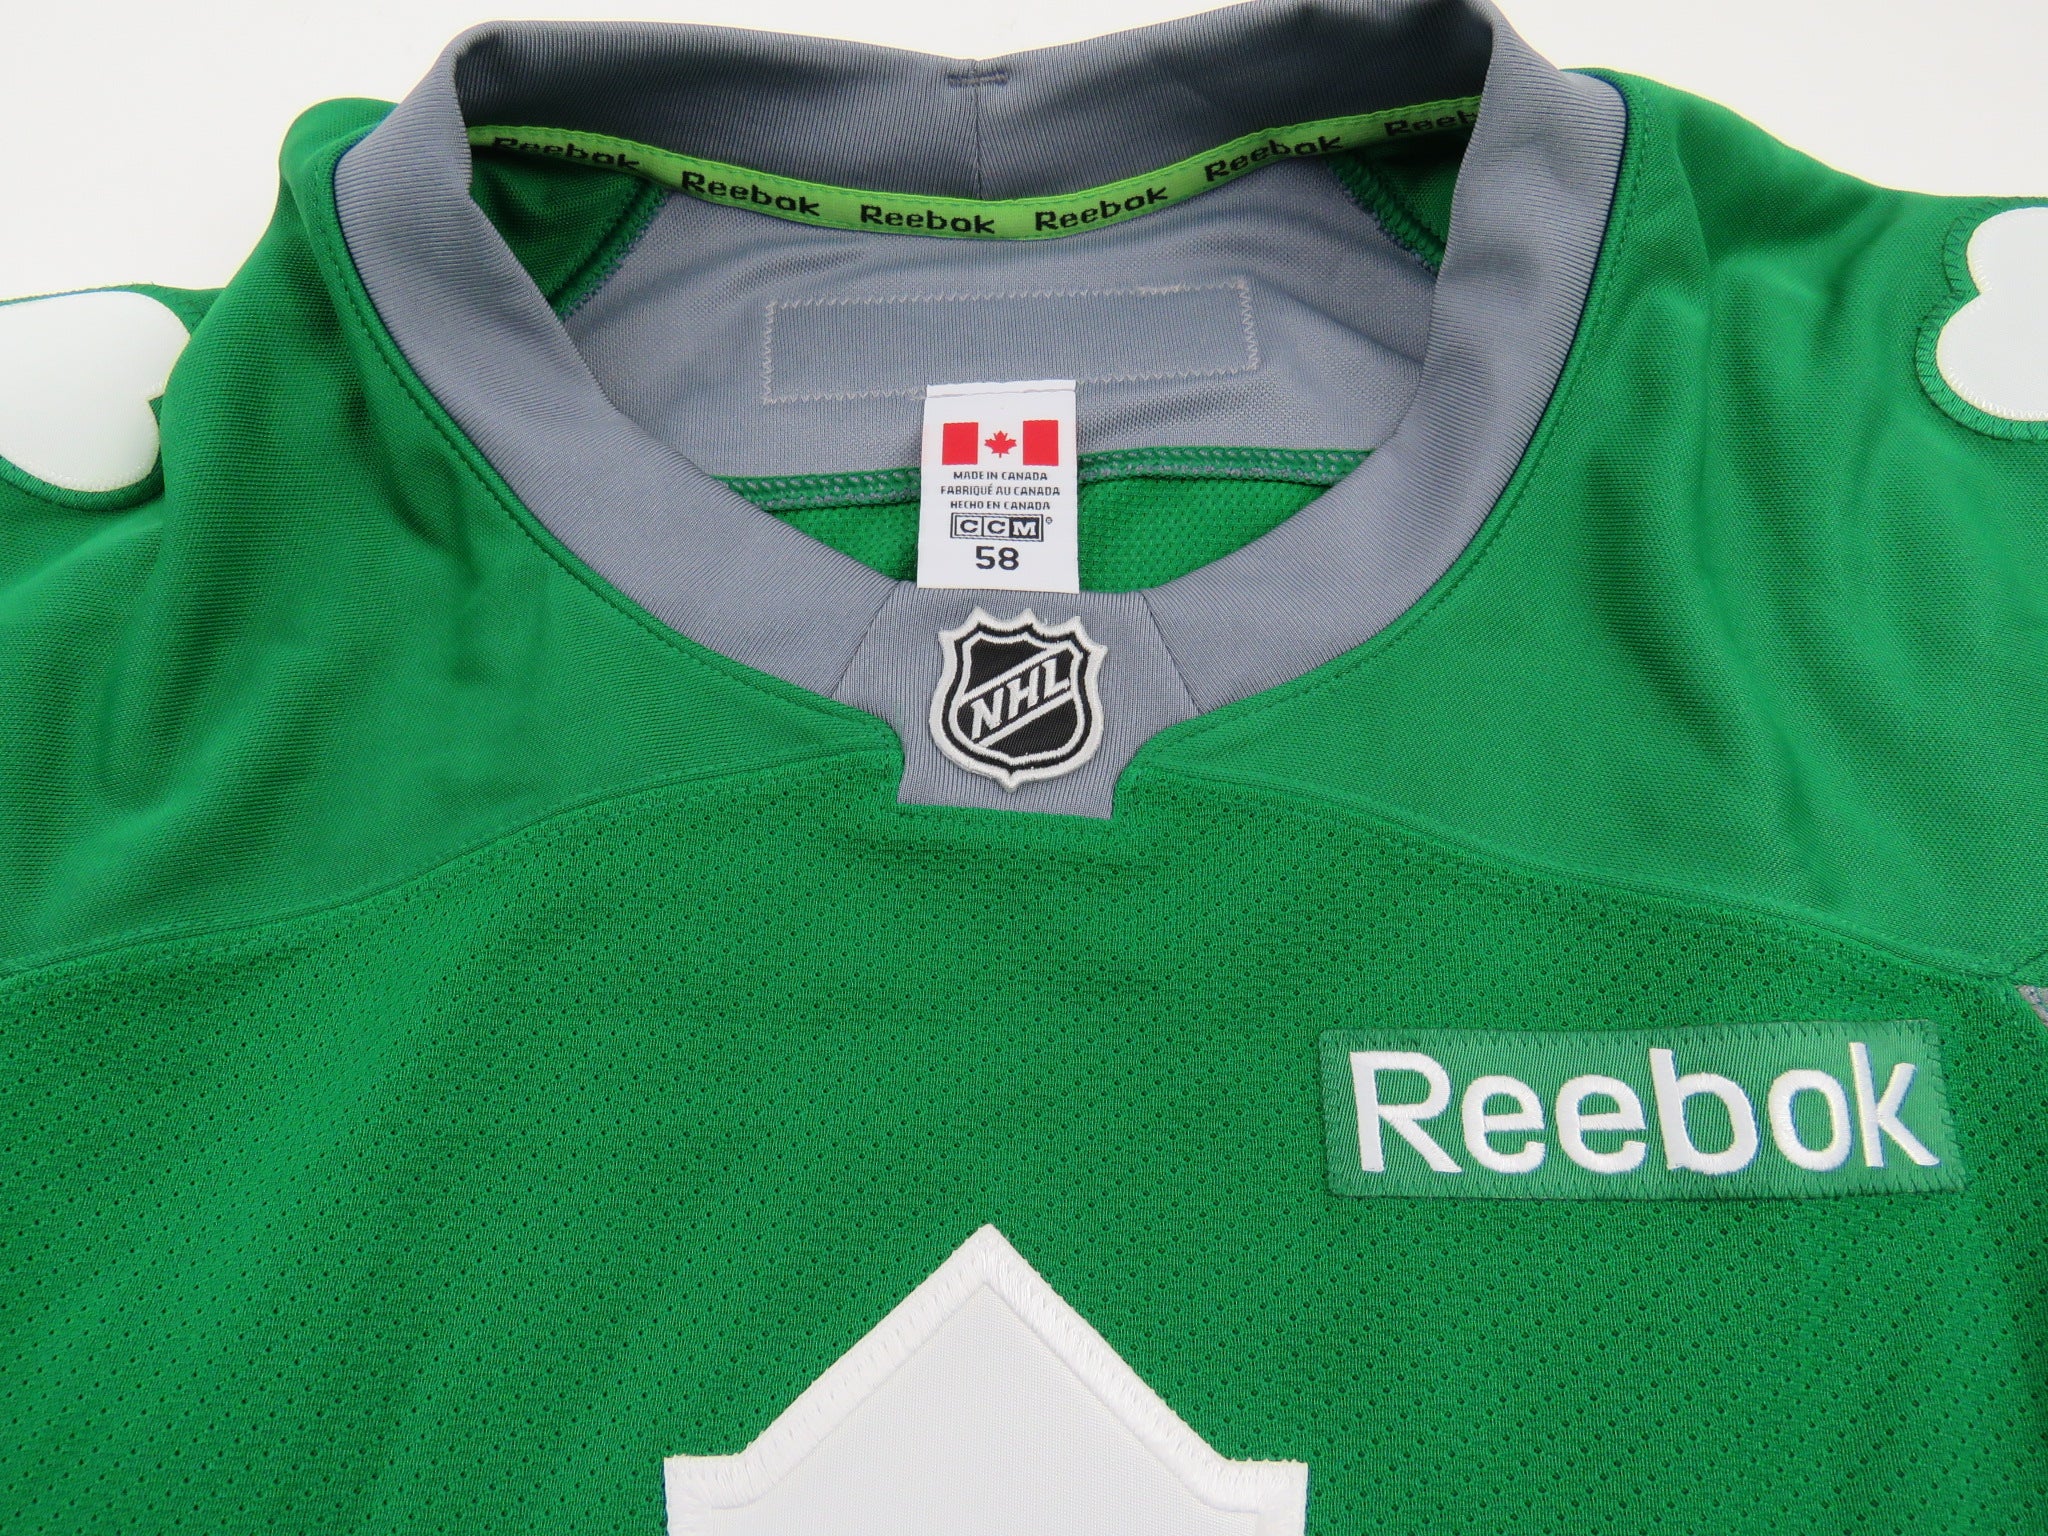 Bruins will wear green St. Patrick's Day jersey during pregame